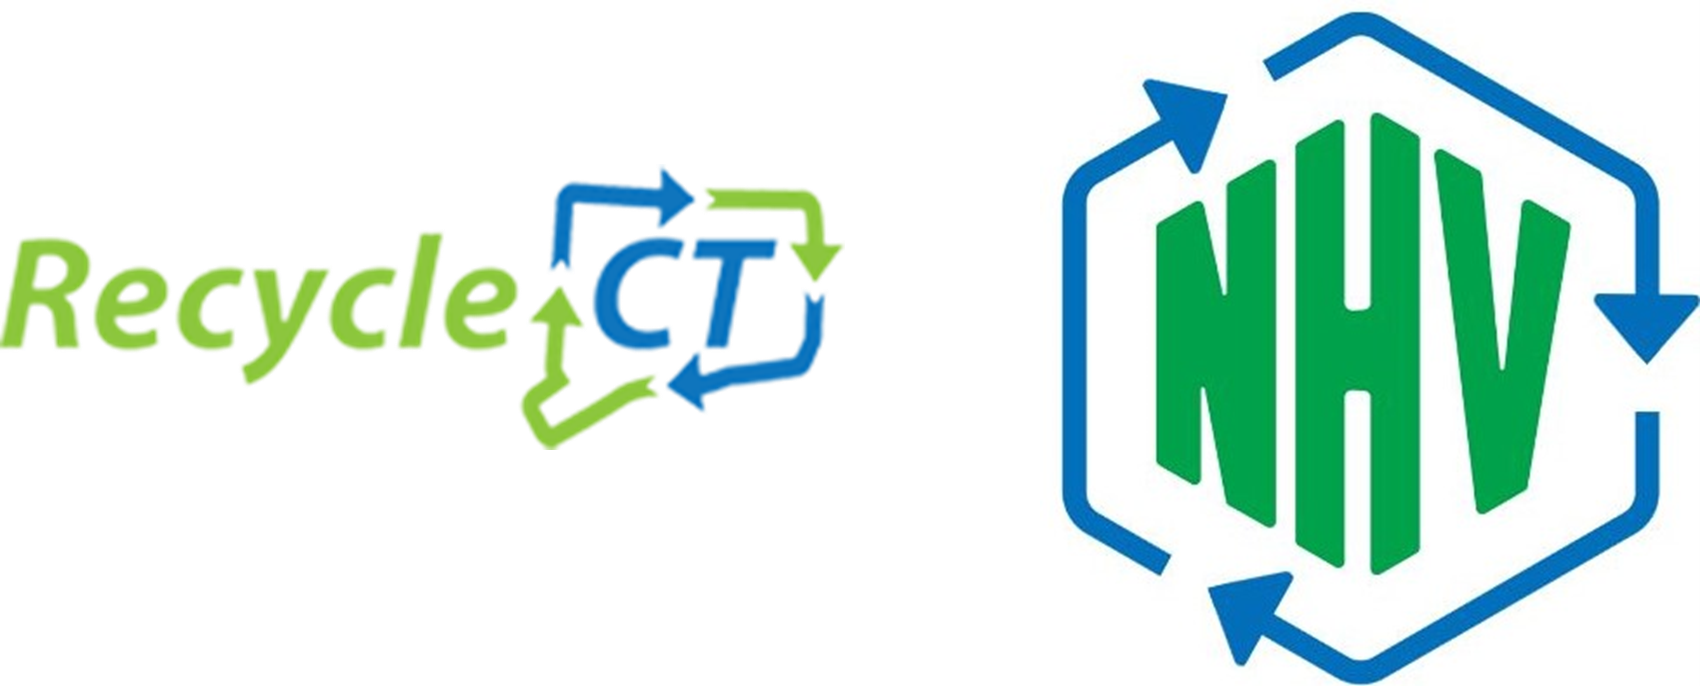 Recycle CT_NHV_logo_recycle